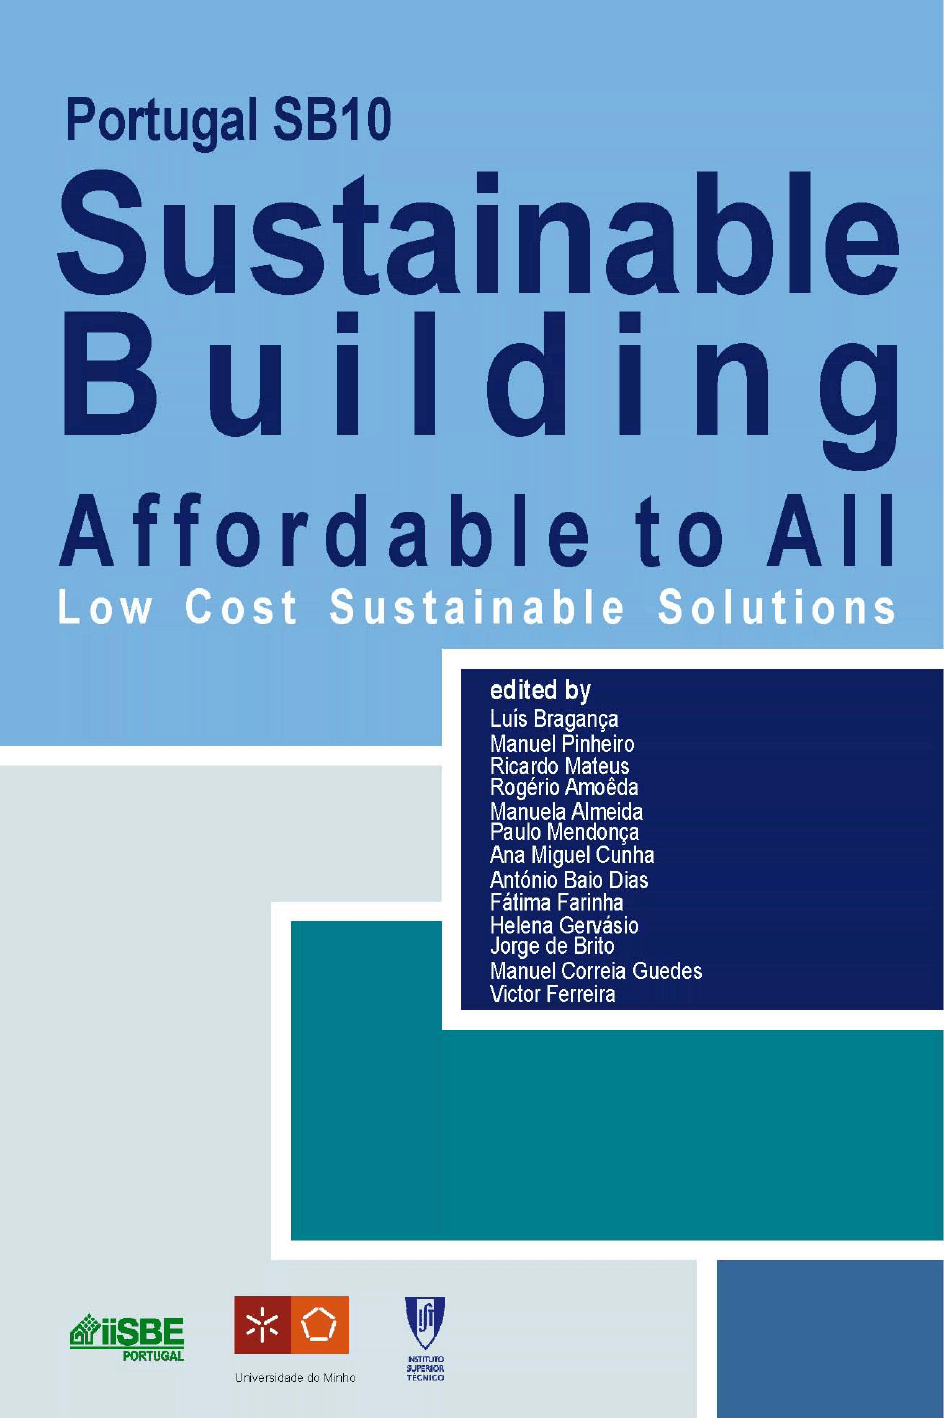 SB10 - SUSTAINABLE BUILDING - AFFORDABLE TO ALL